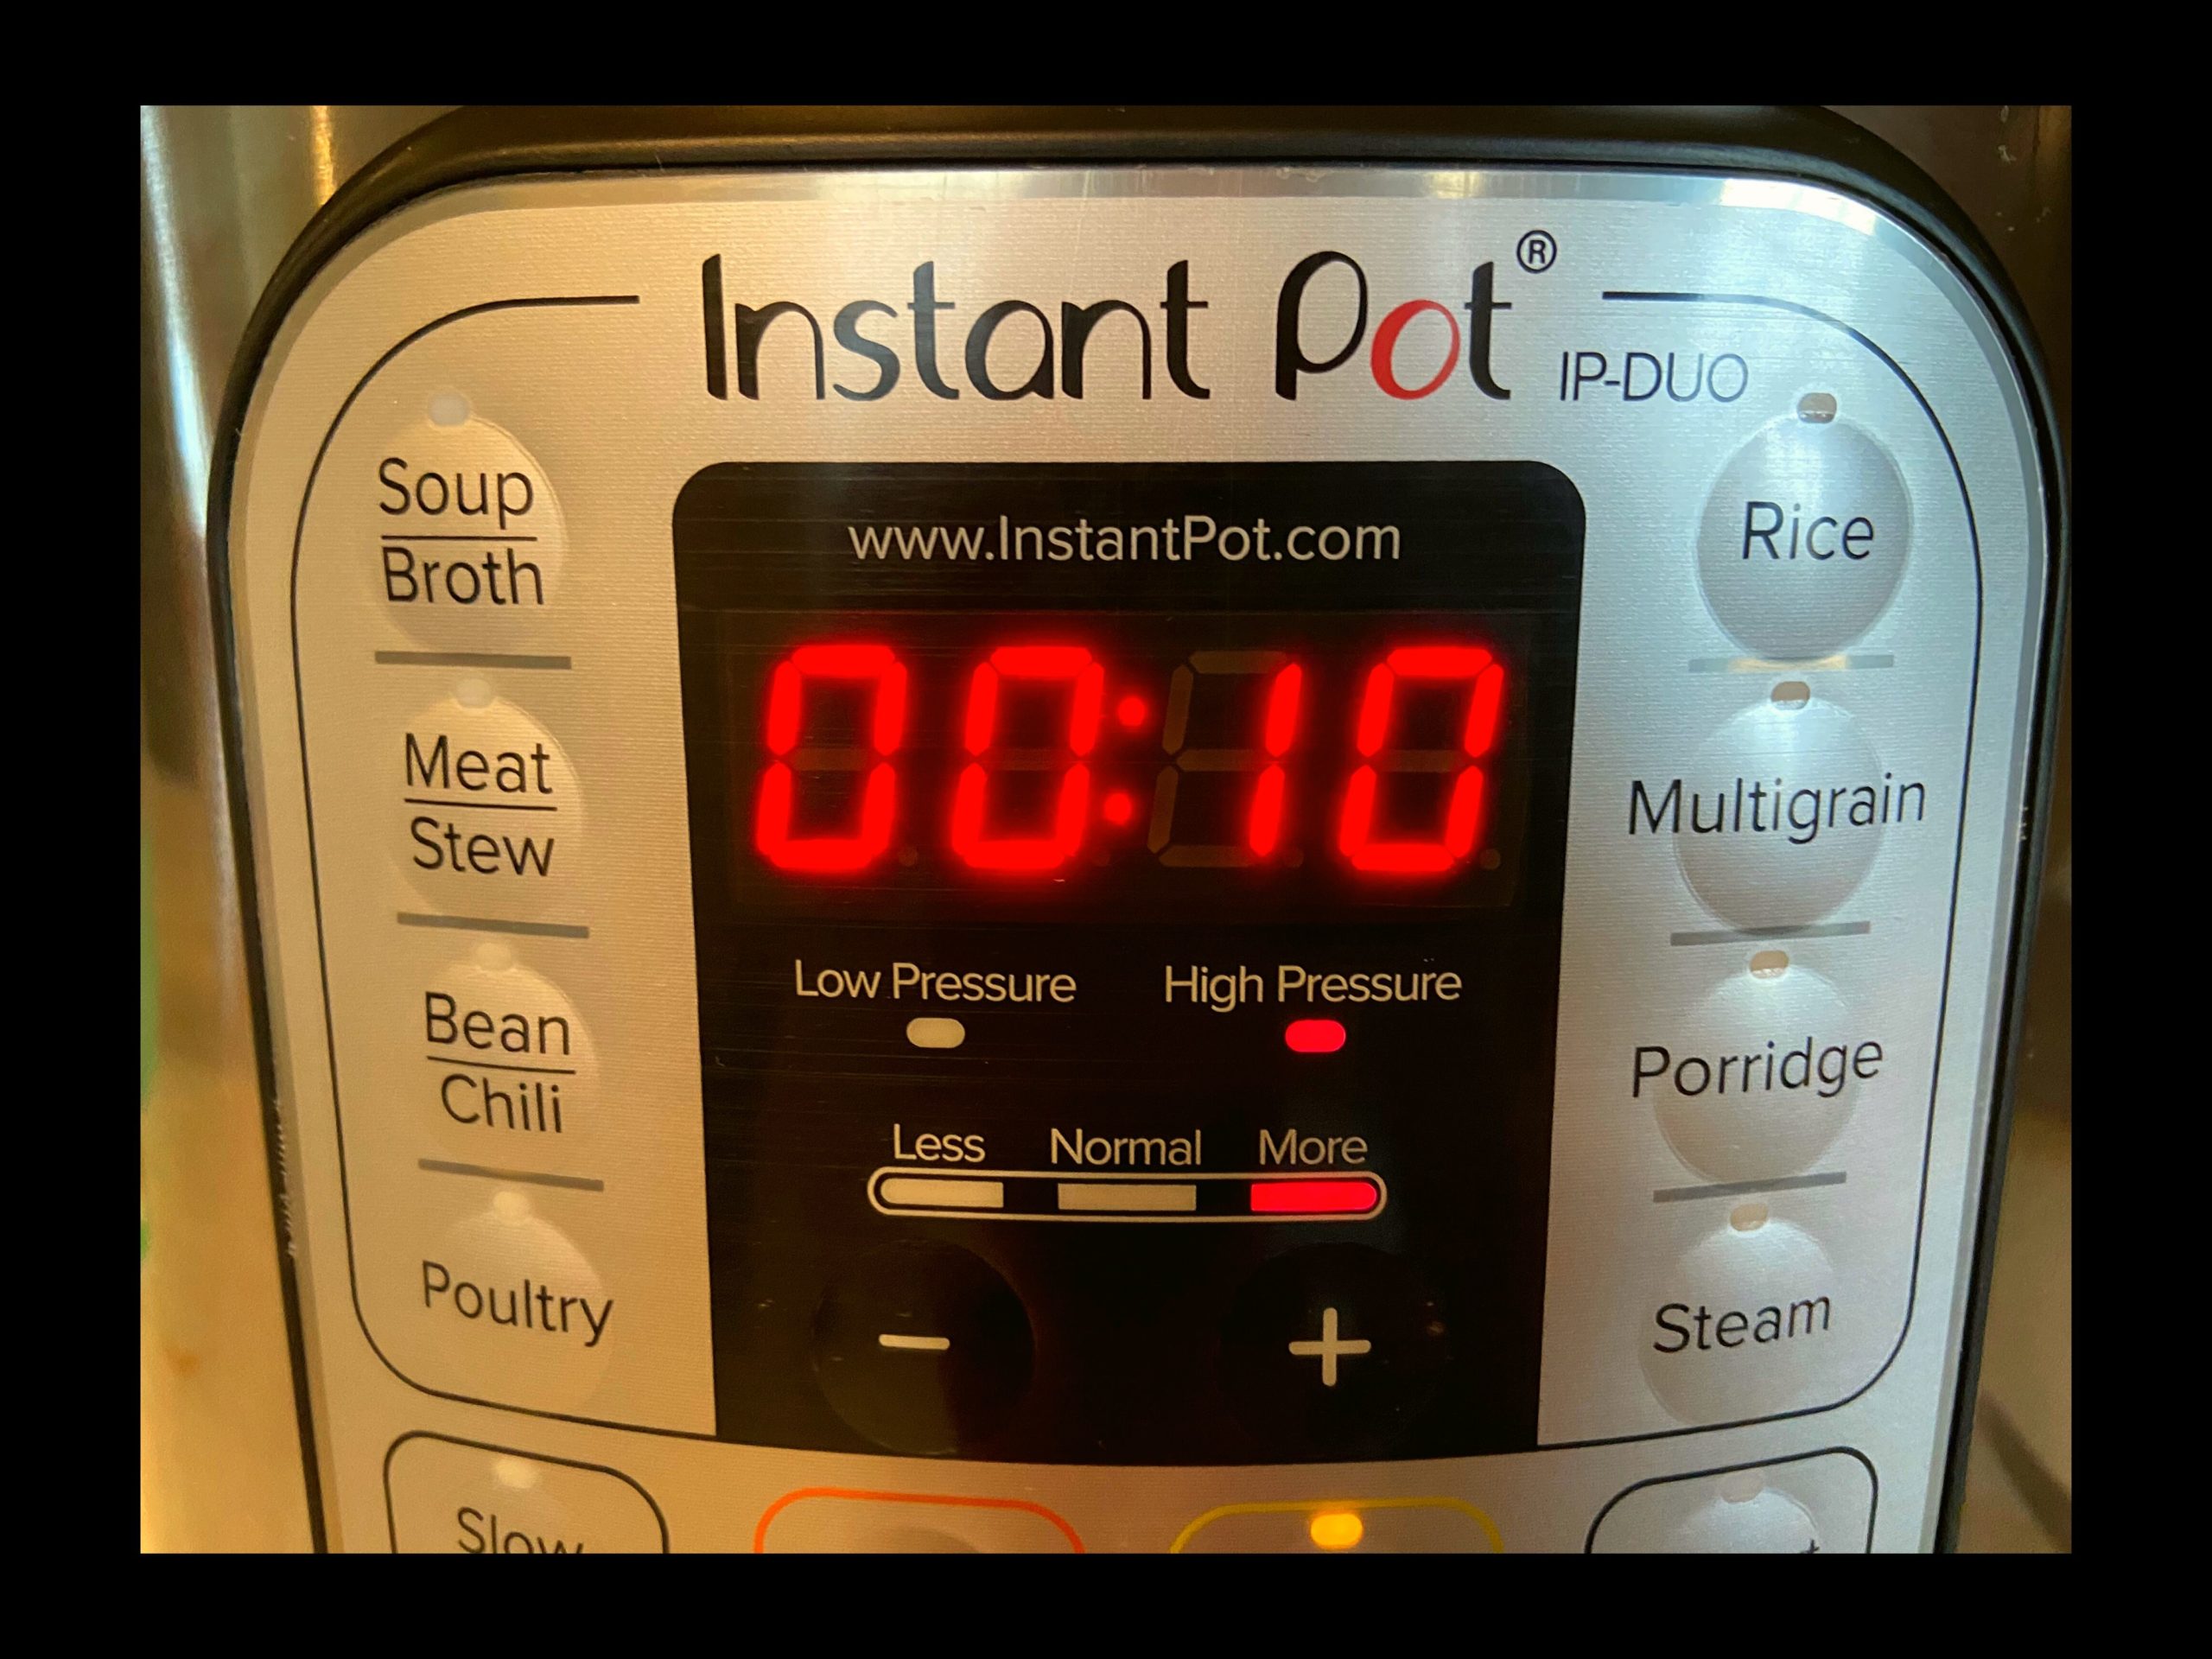 The timer on the front of an 8 qt. Instant Pot displaying 10 minutes of High Pressure selected.